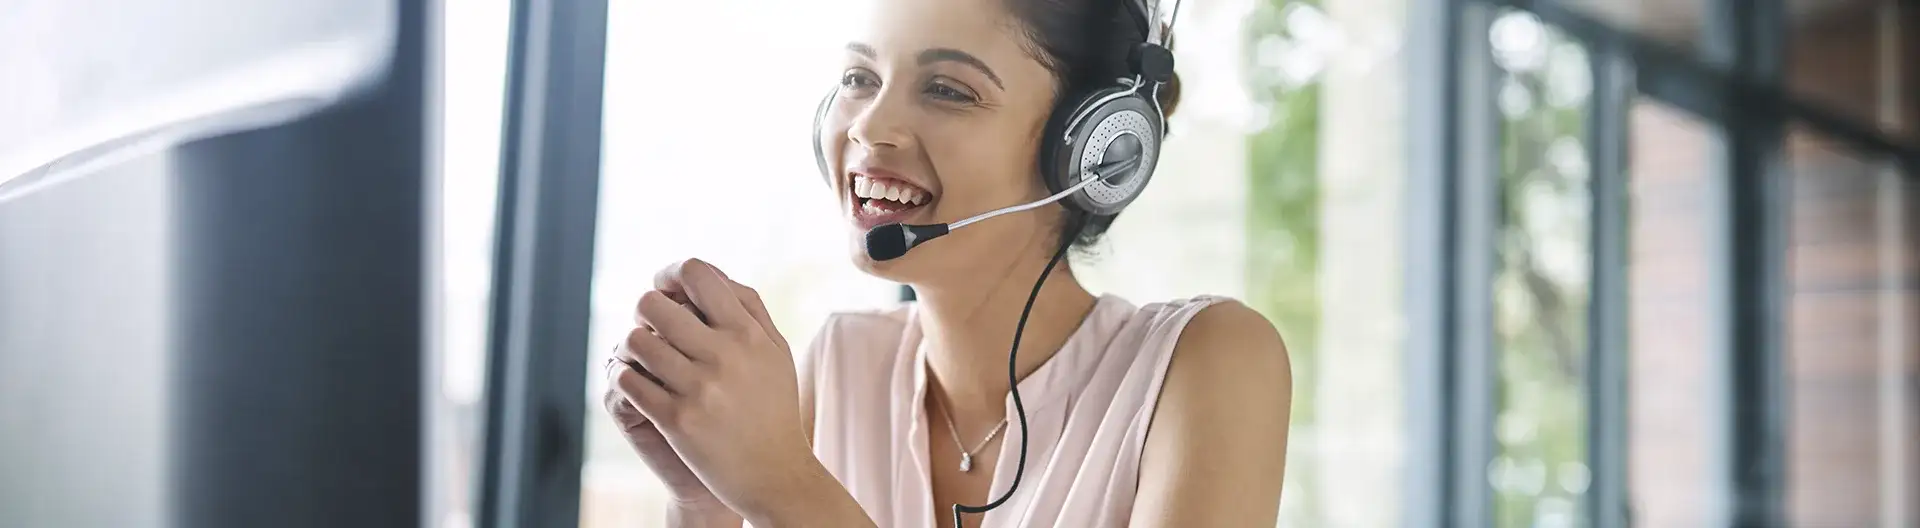 Top 5 Ways of Improving Customer Experience in Telecom with Virtual Assistants - Banner